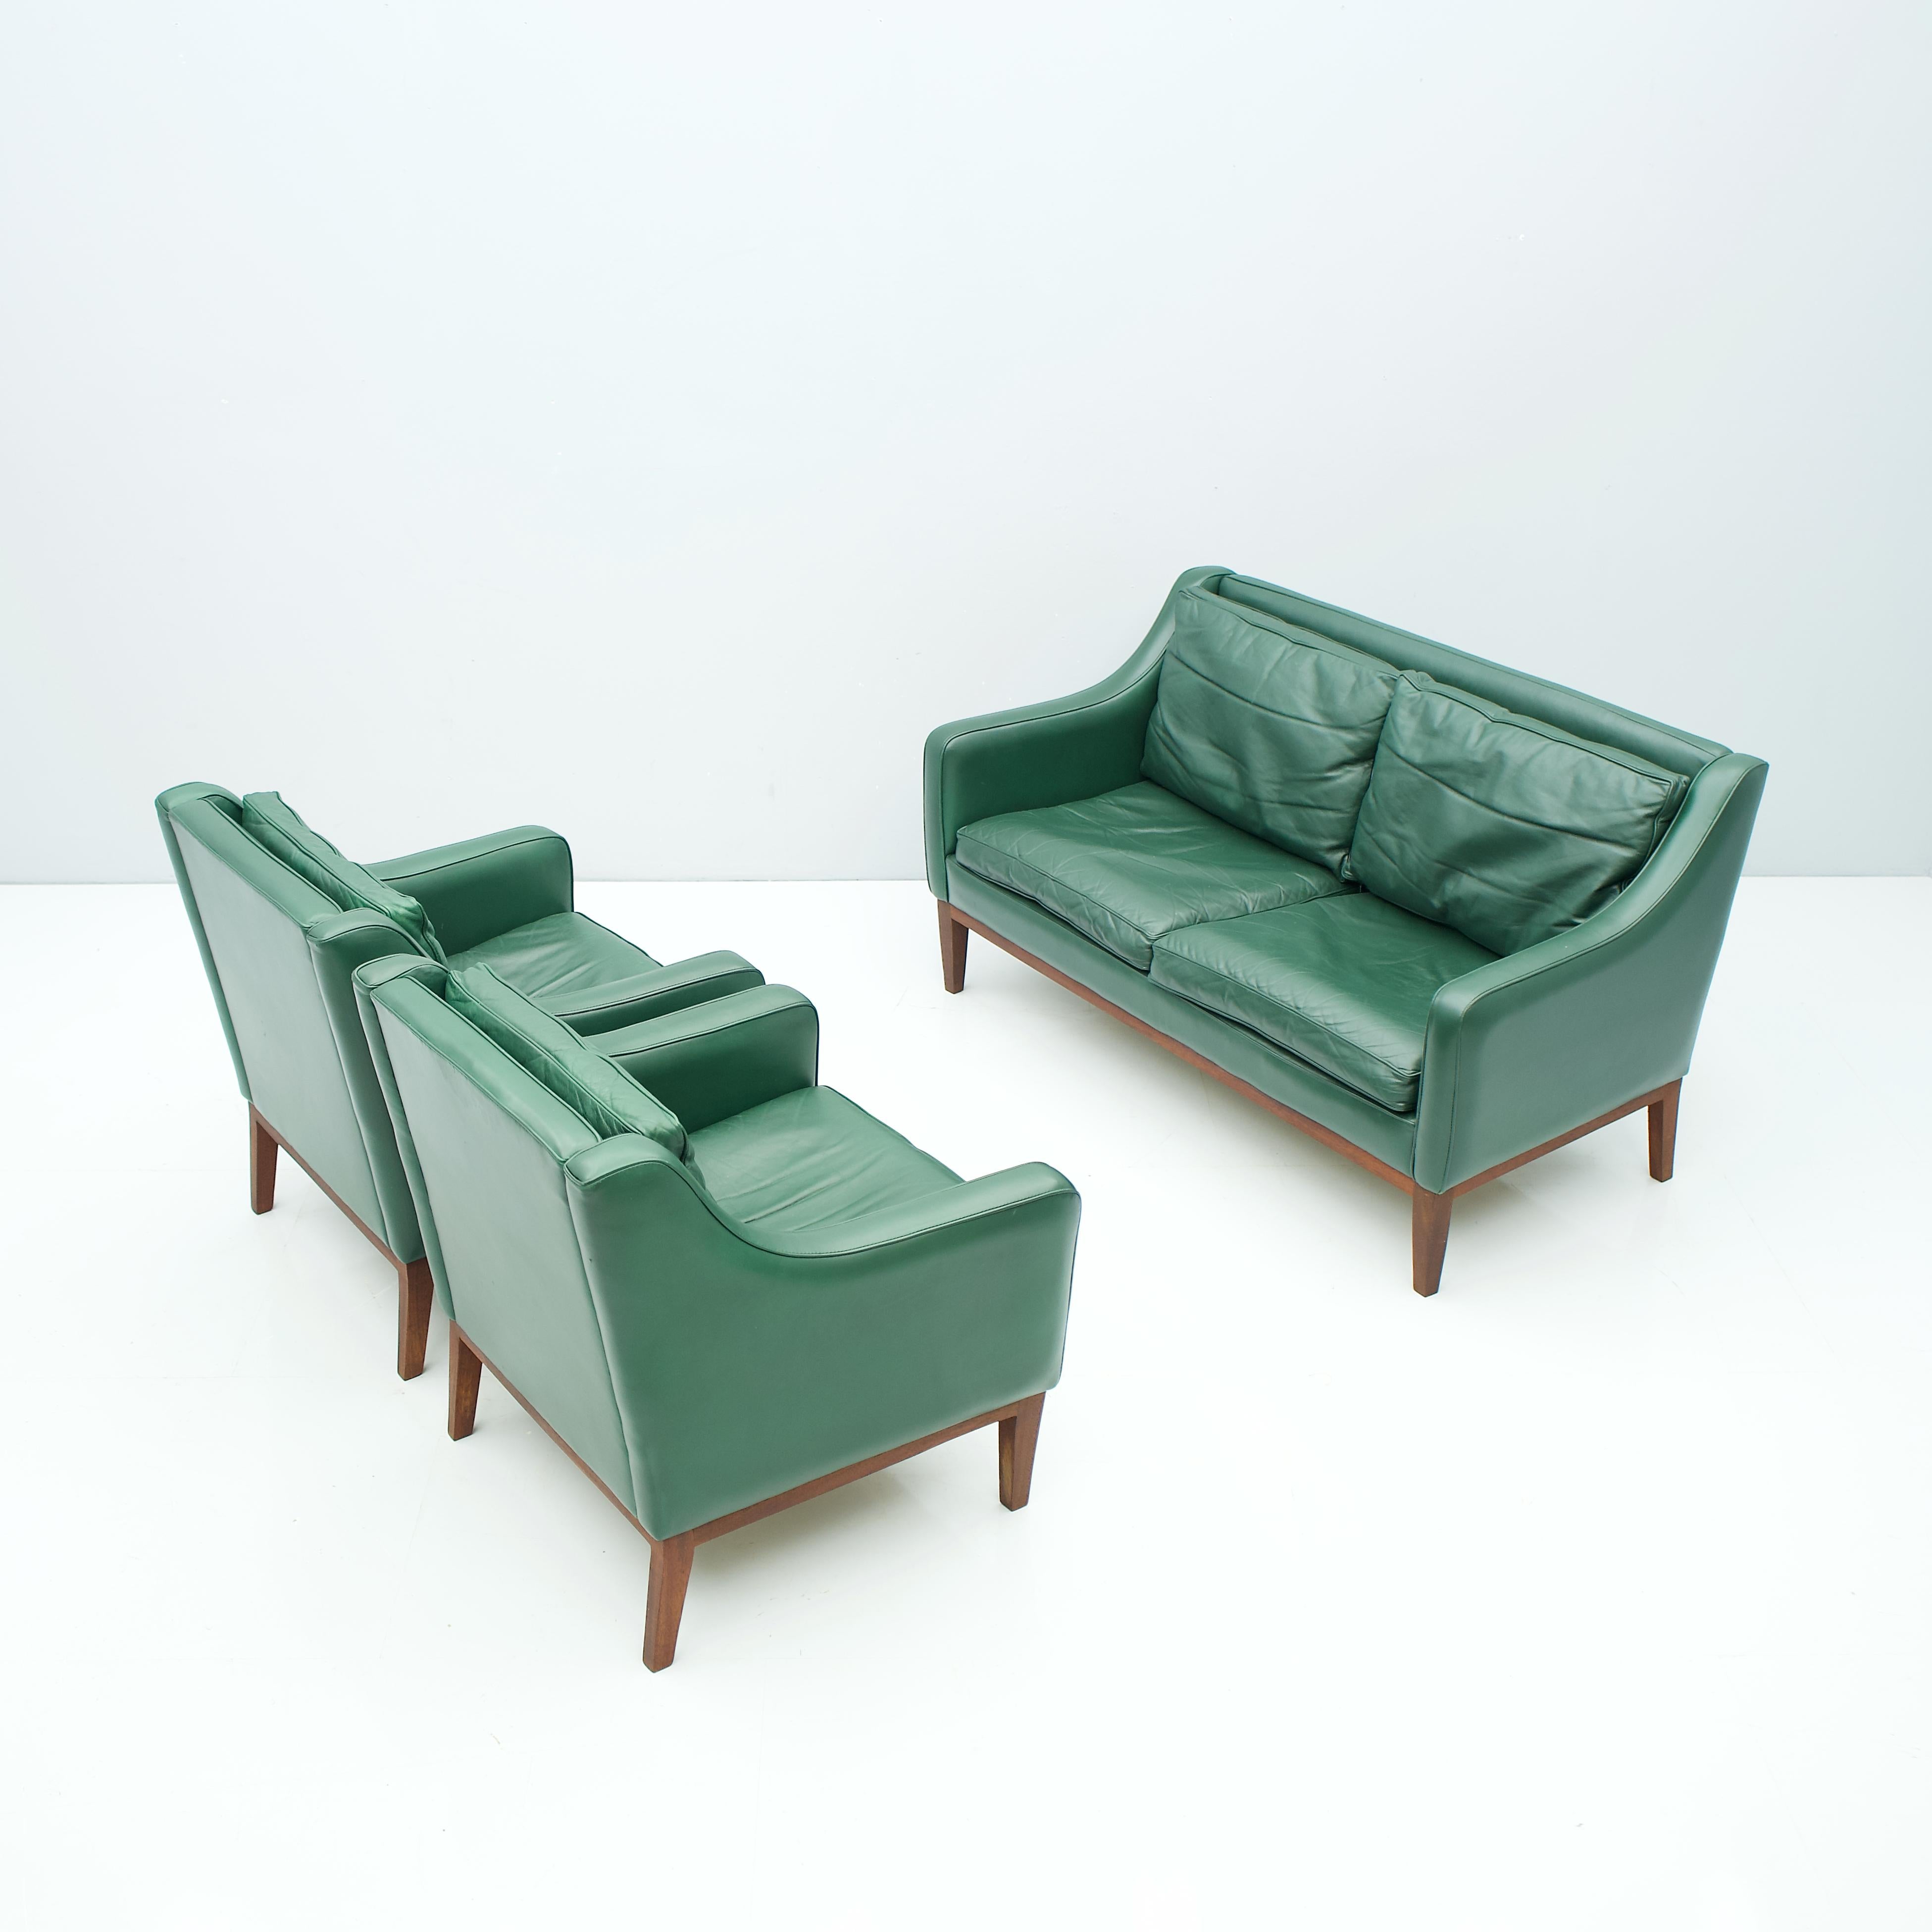 Beautiful living room set in green leather, Italy 1958.
2-seat sofa and two lounge chairs in green leather and wood frame (teak). The pillows are partly filled with down. The Set was bought in 1958. Origin Italy. 
Measures: 
H 76.5 cm, W 137 cm,